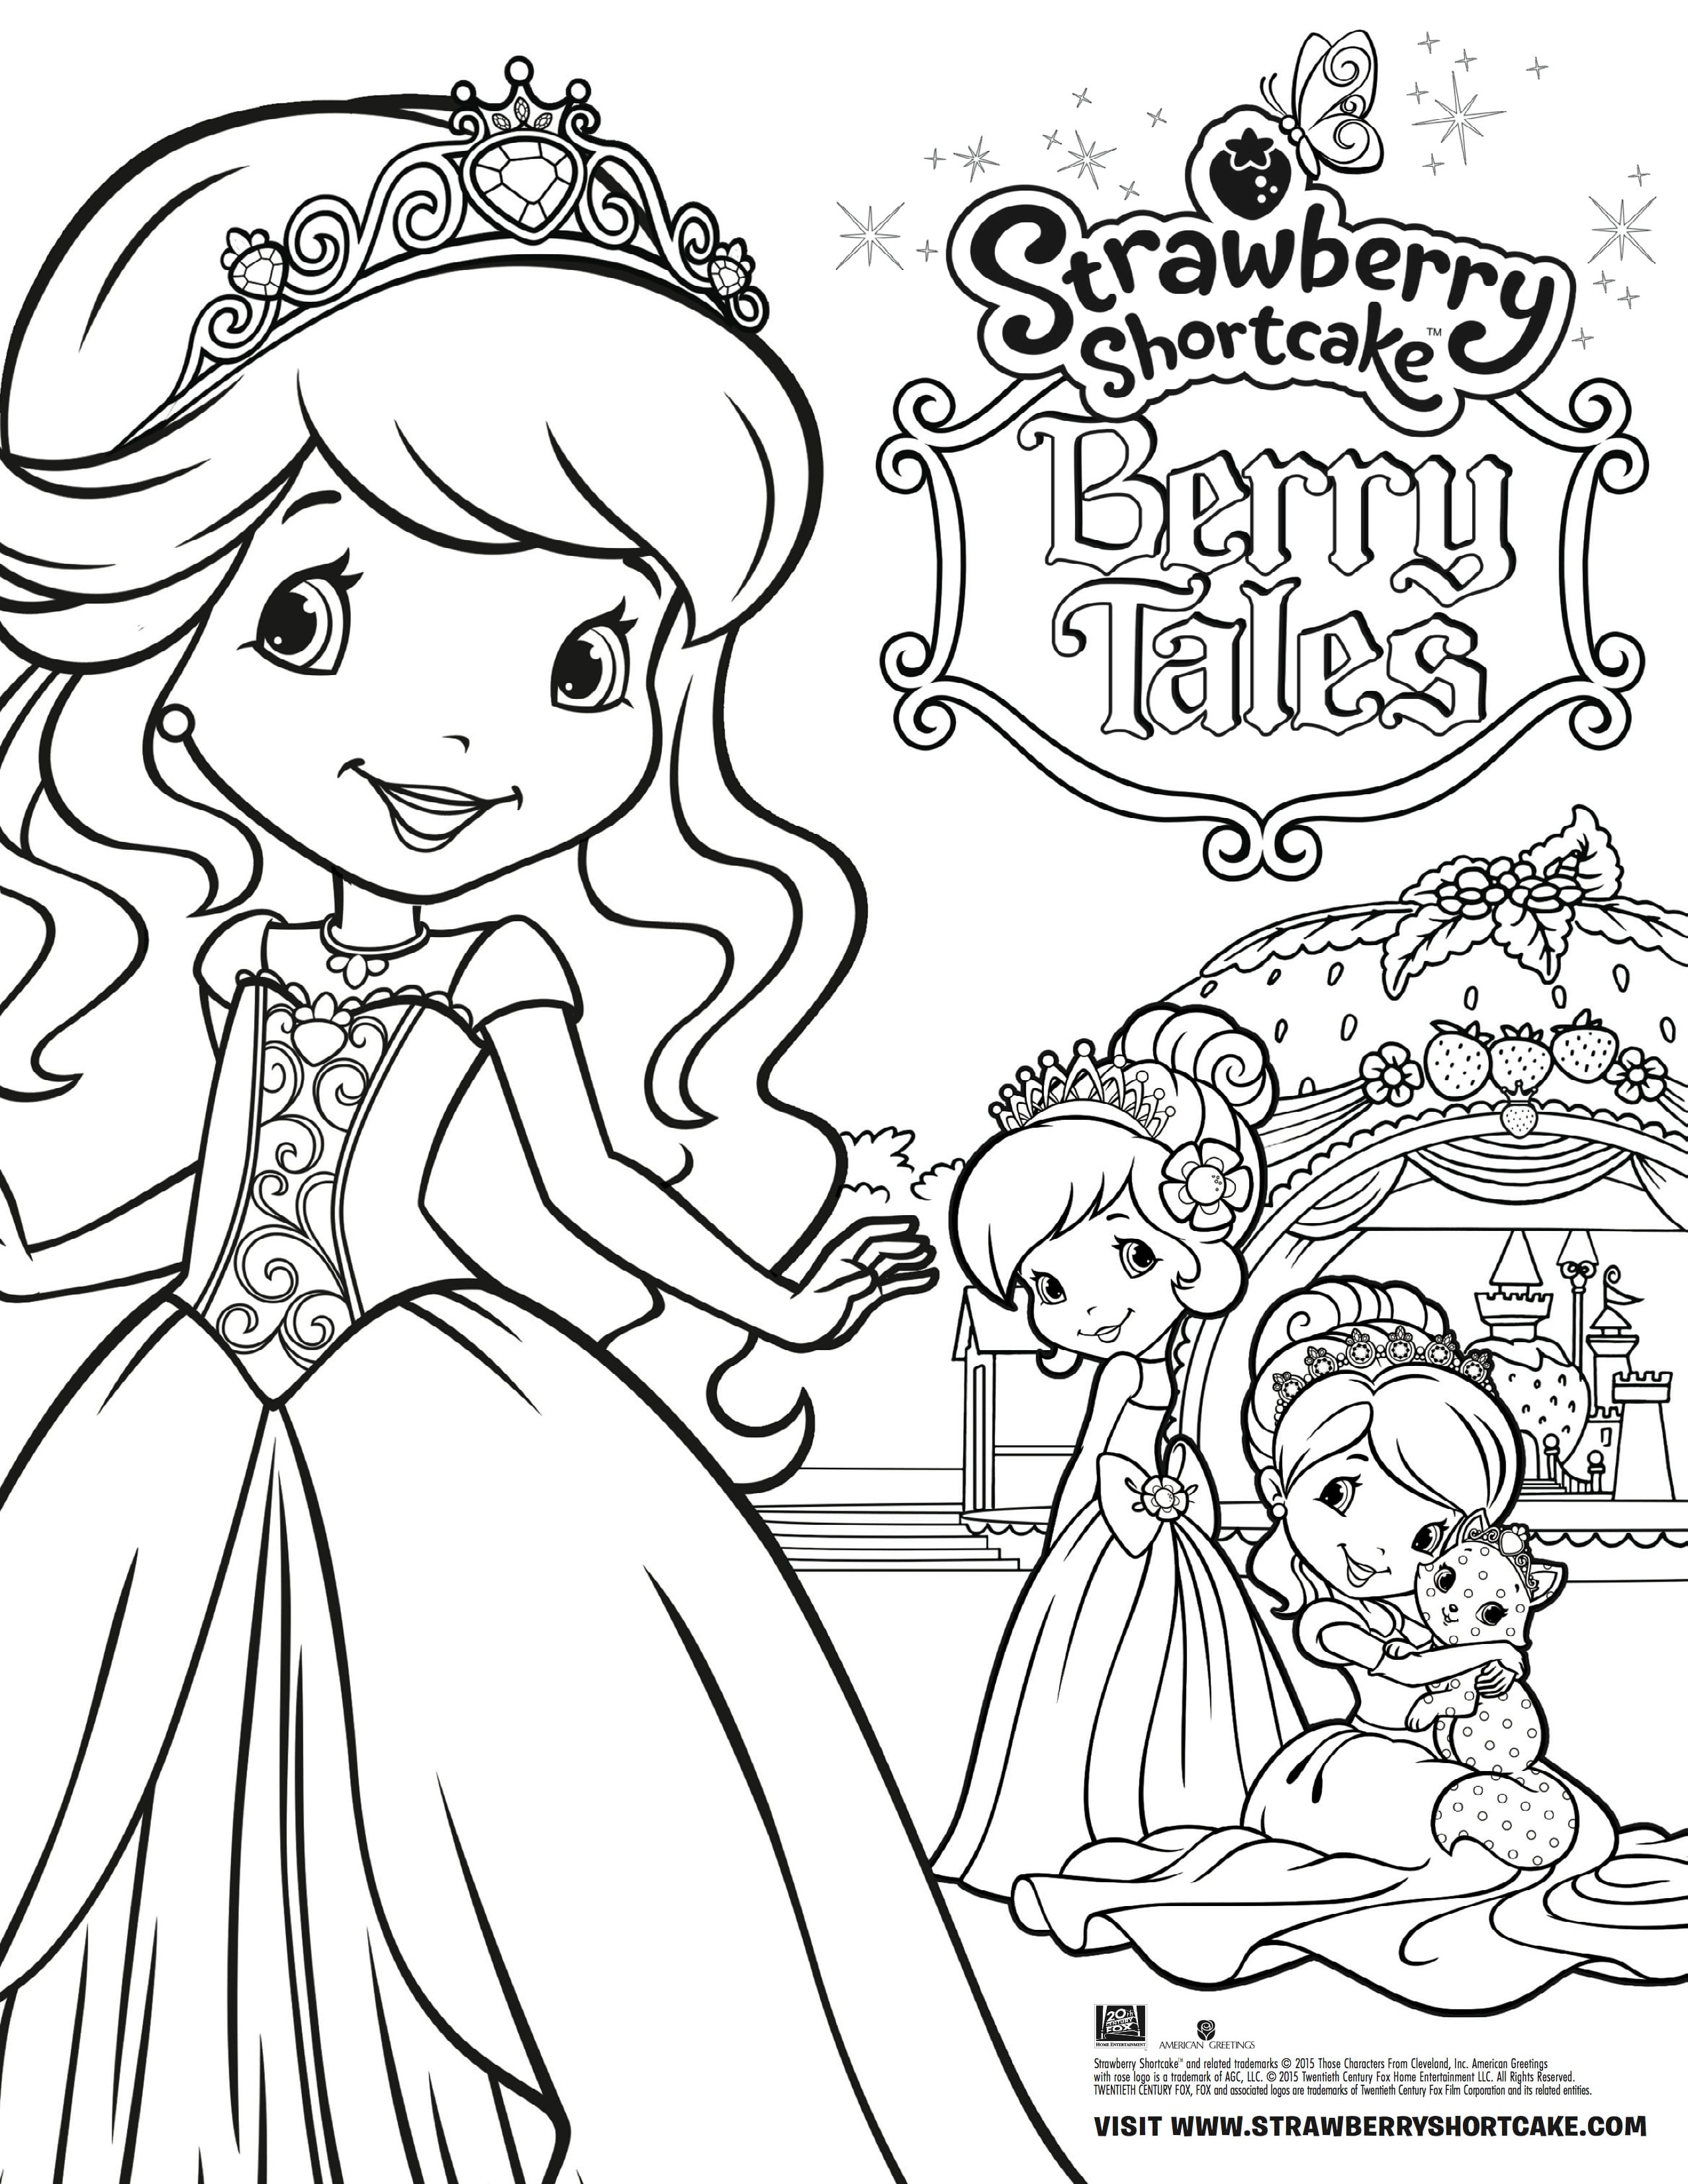 Strawberry Shortcake Berry Tales Takes the Stage Coloring Page ...